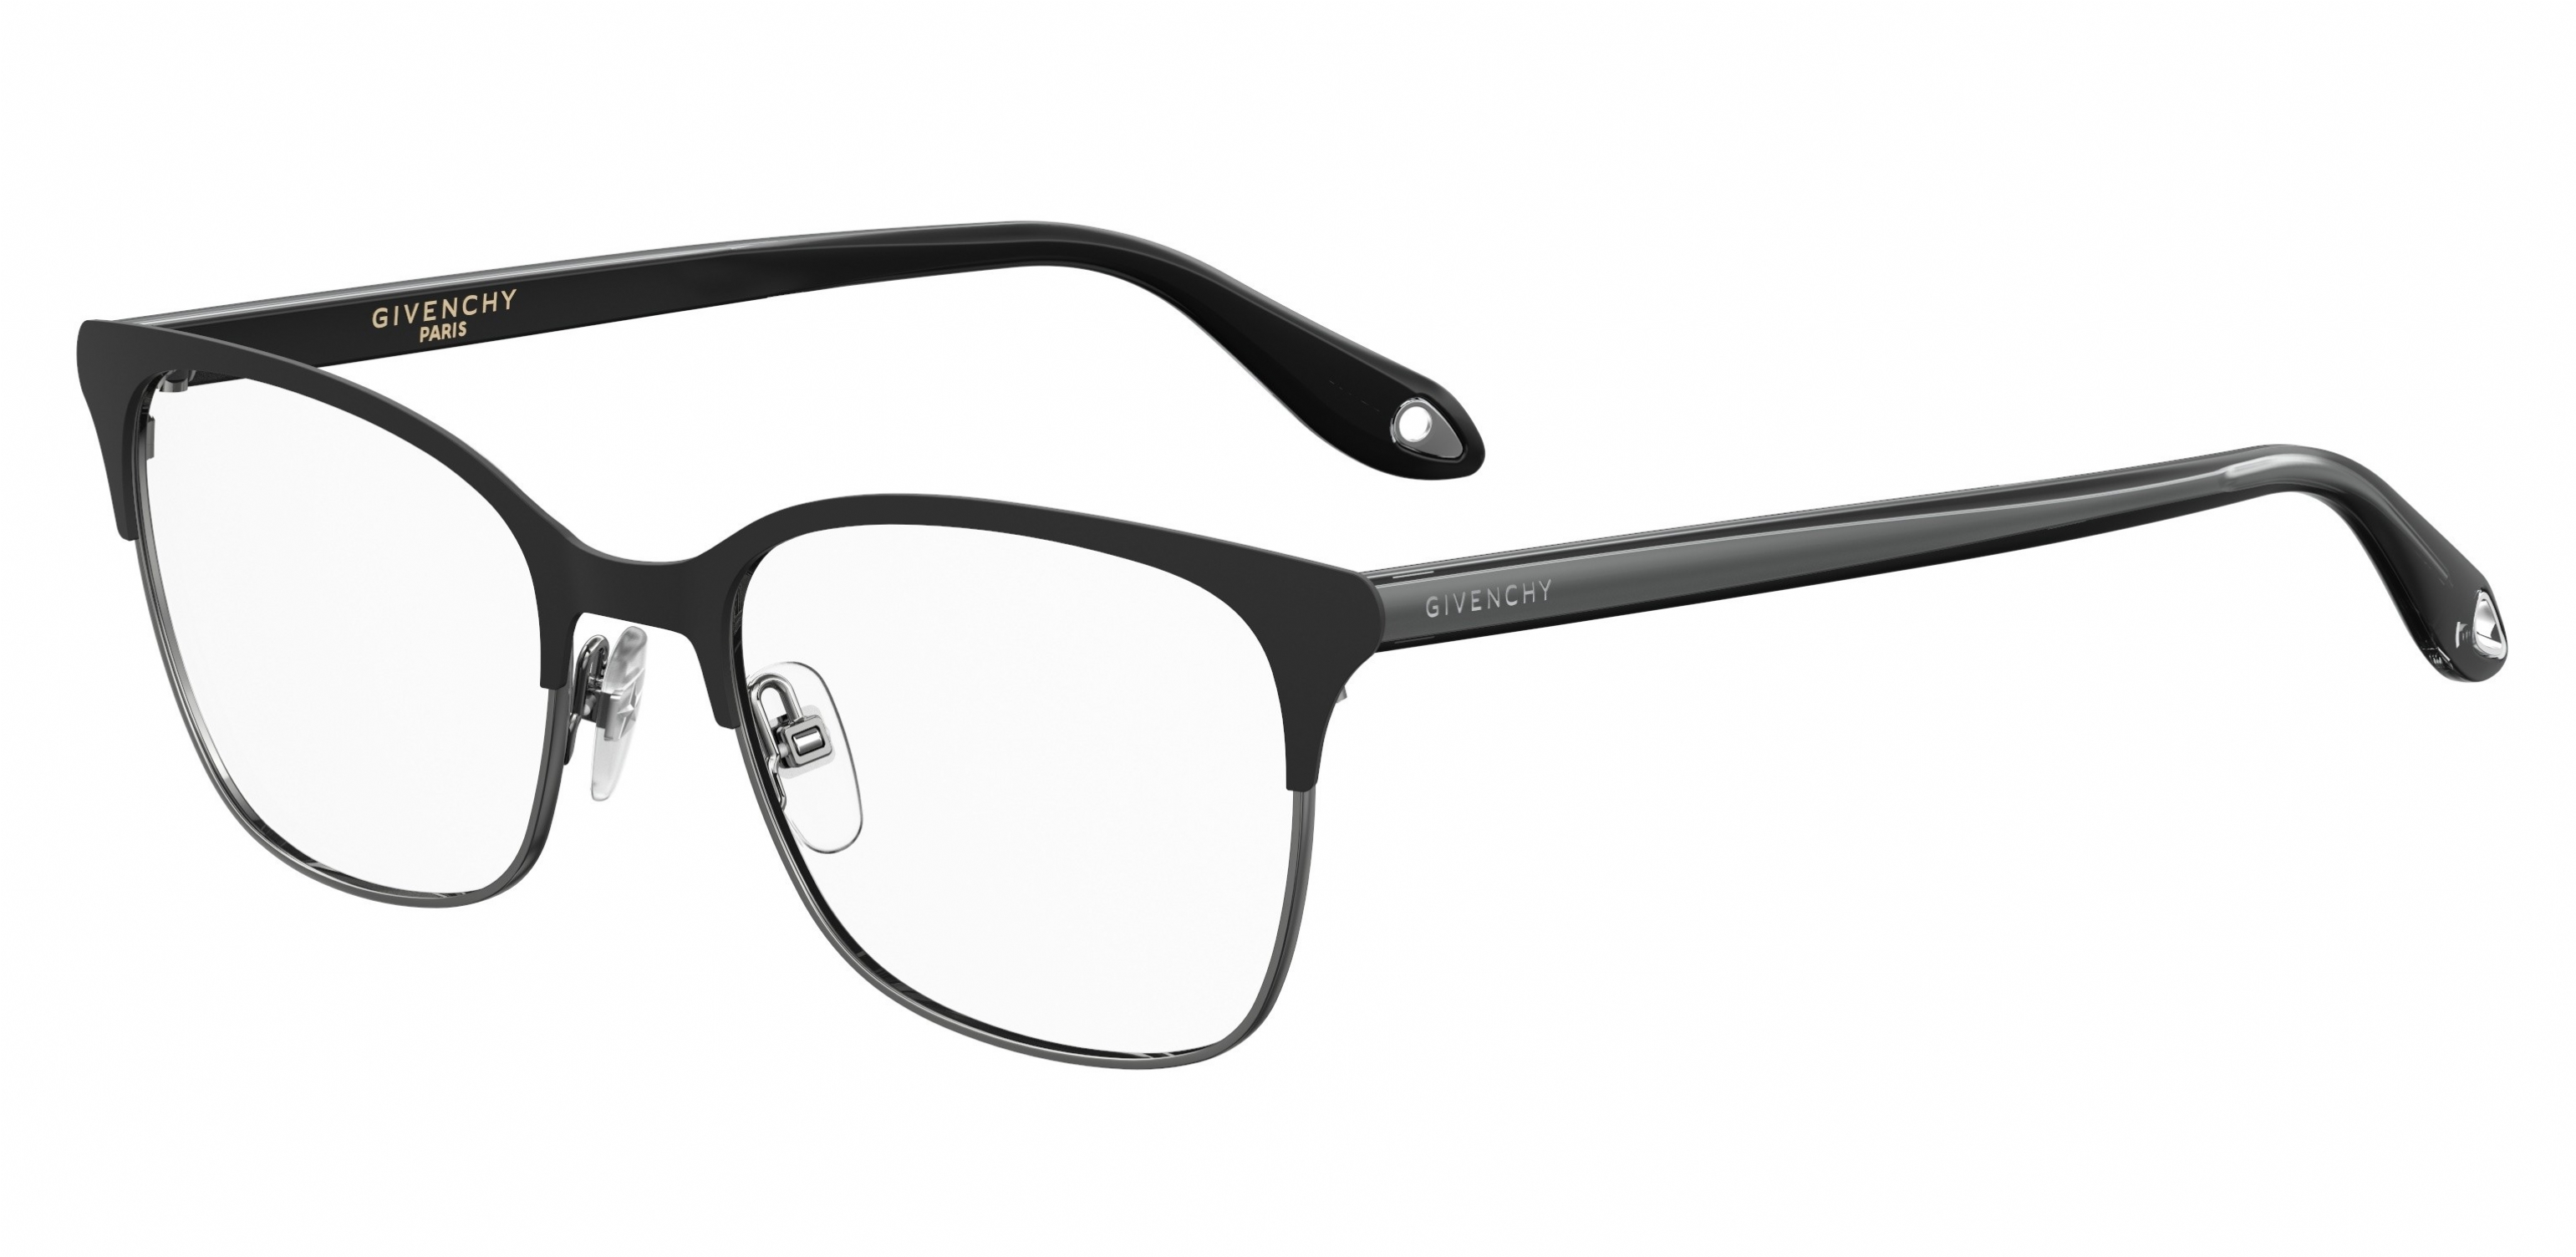 Buy Givenchy Eyeglasses directly from OpticsFast.com